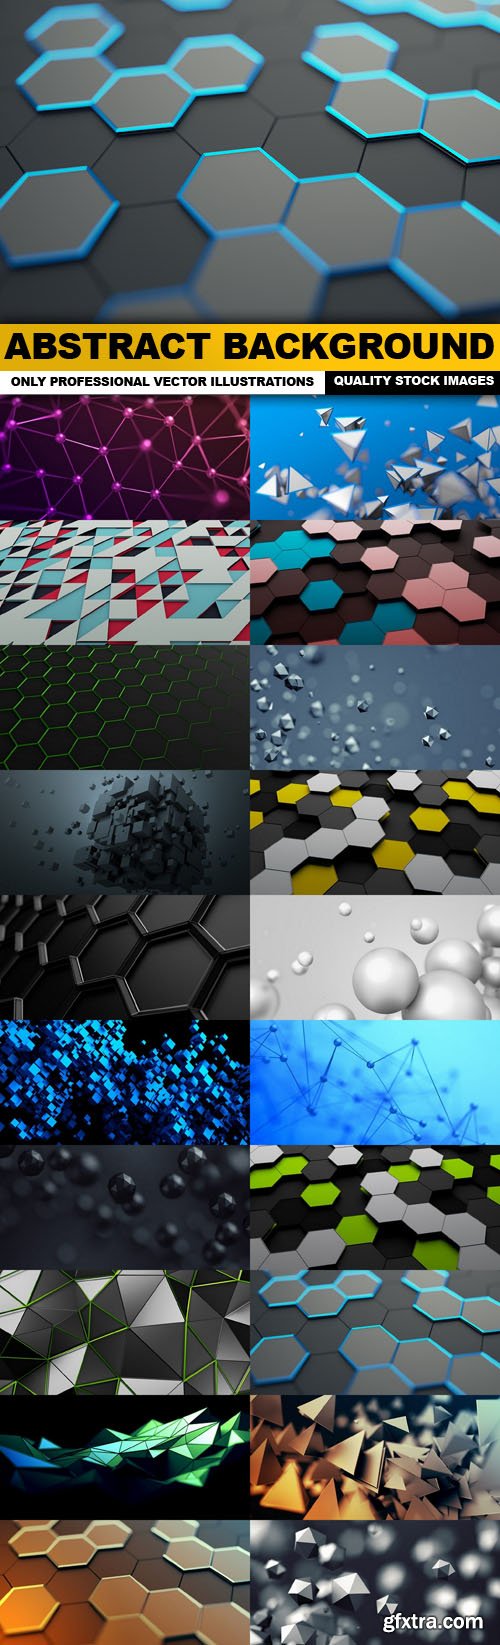 Abstract Background - 20 HQ Images